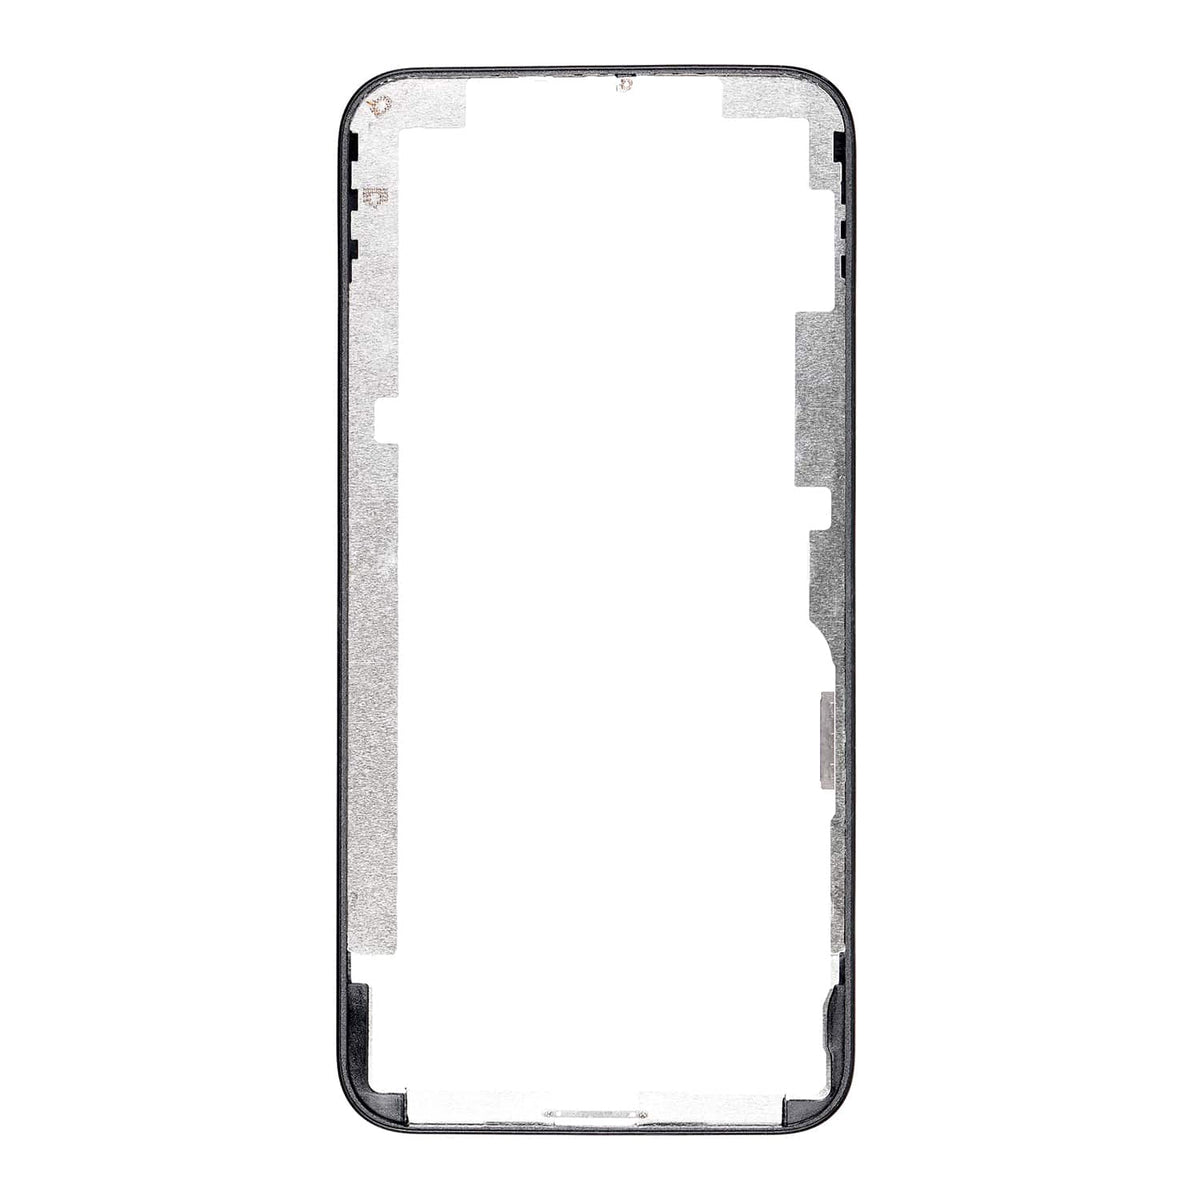 FRONT SUPPORTING DIGITIZER FRAME FOR IPHONE XS